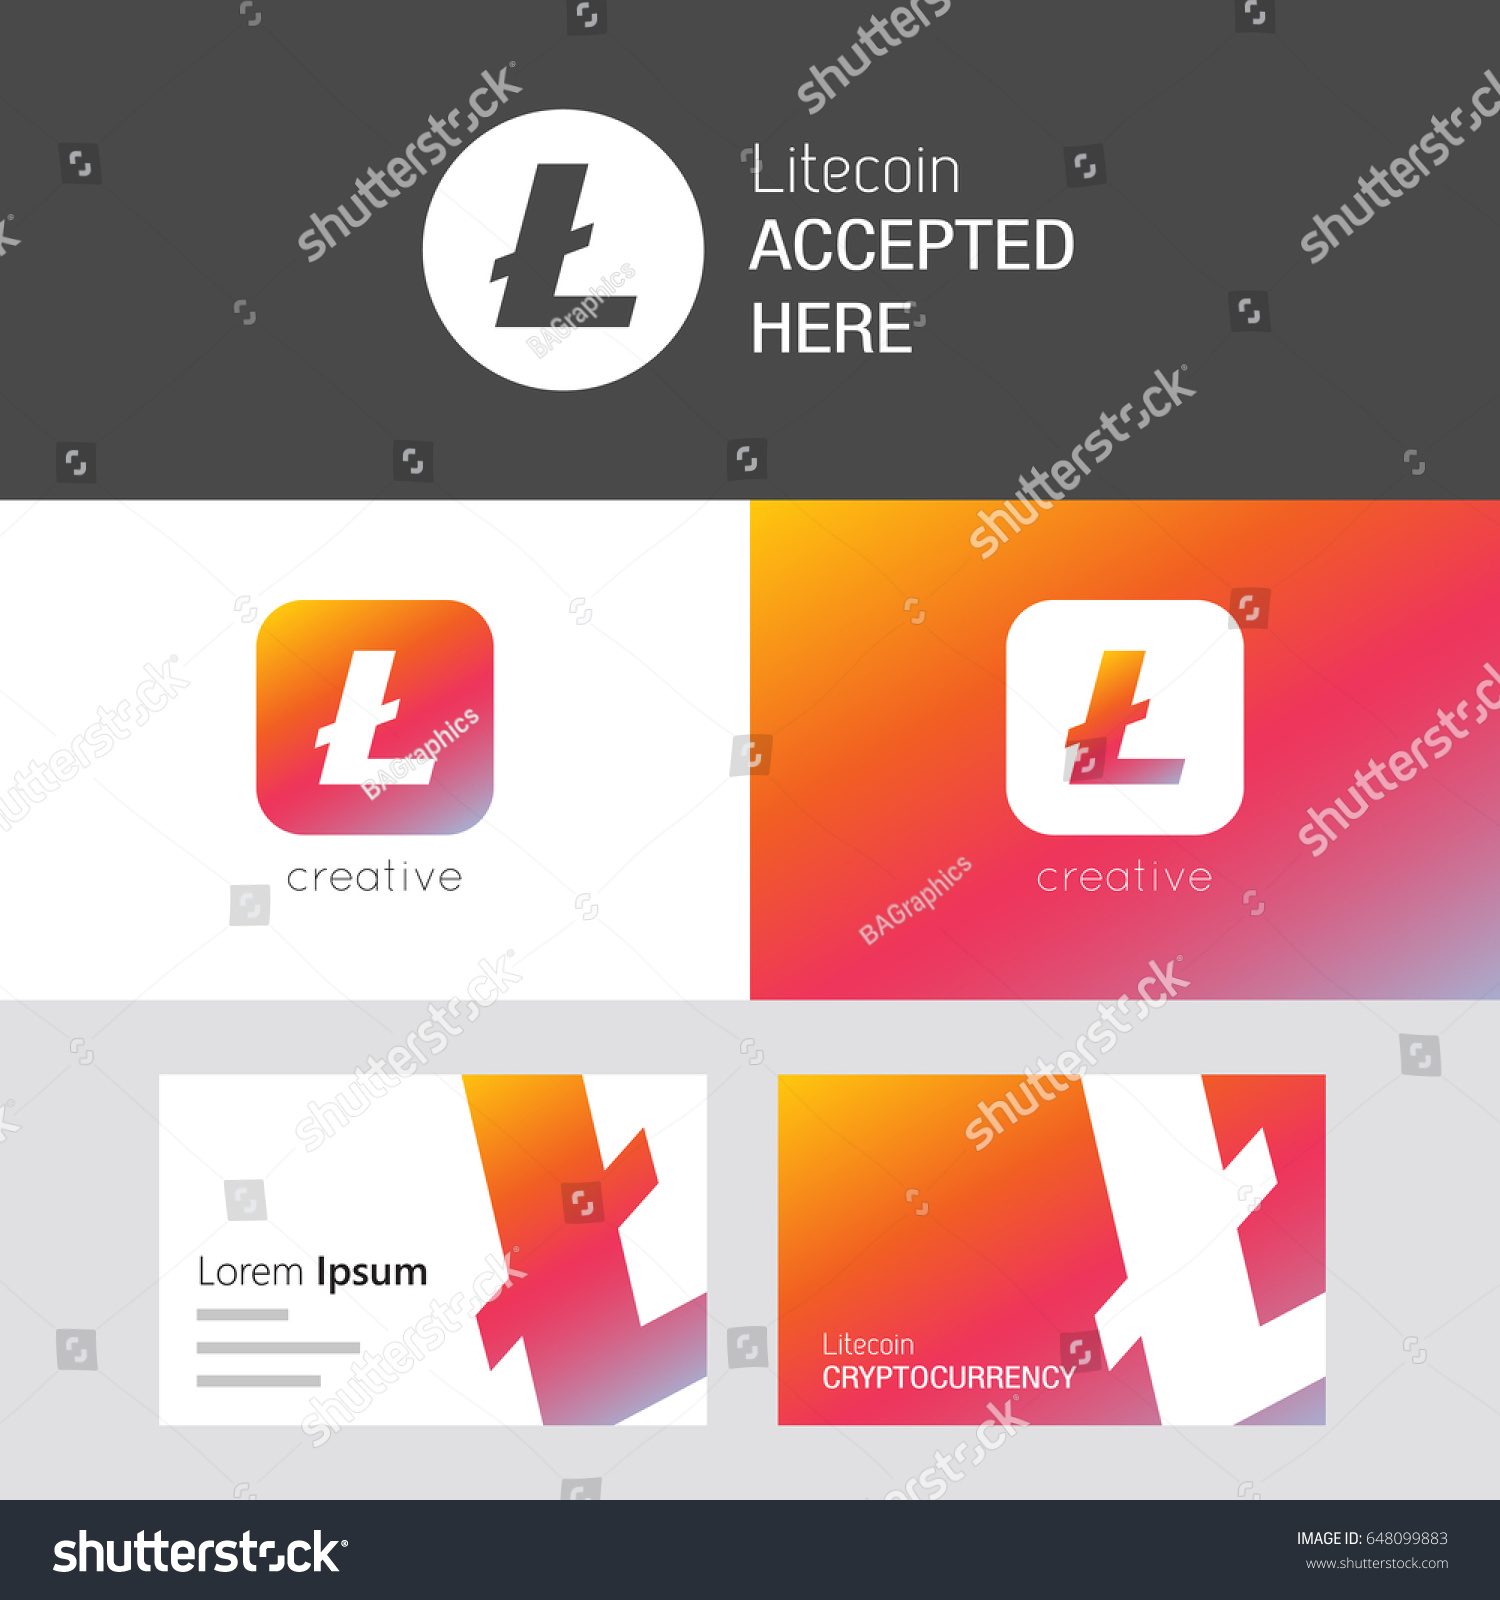 SVG of Litecoin vector set. Useful as brand logo, app icon or business card. Compatible with PNG, AI, CDR, JPG, SVG, PDF, ICO or EPS formats. svg